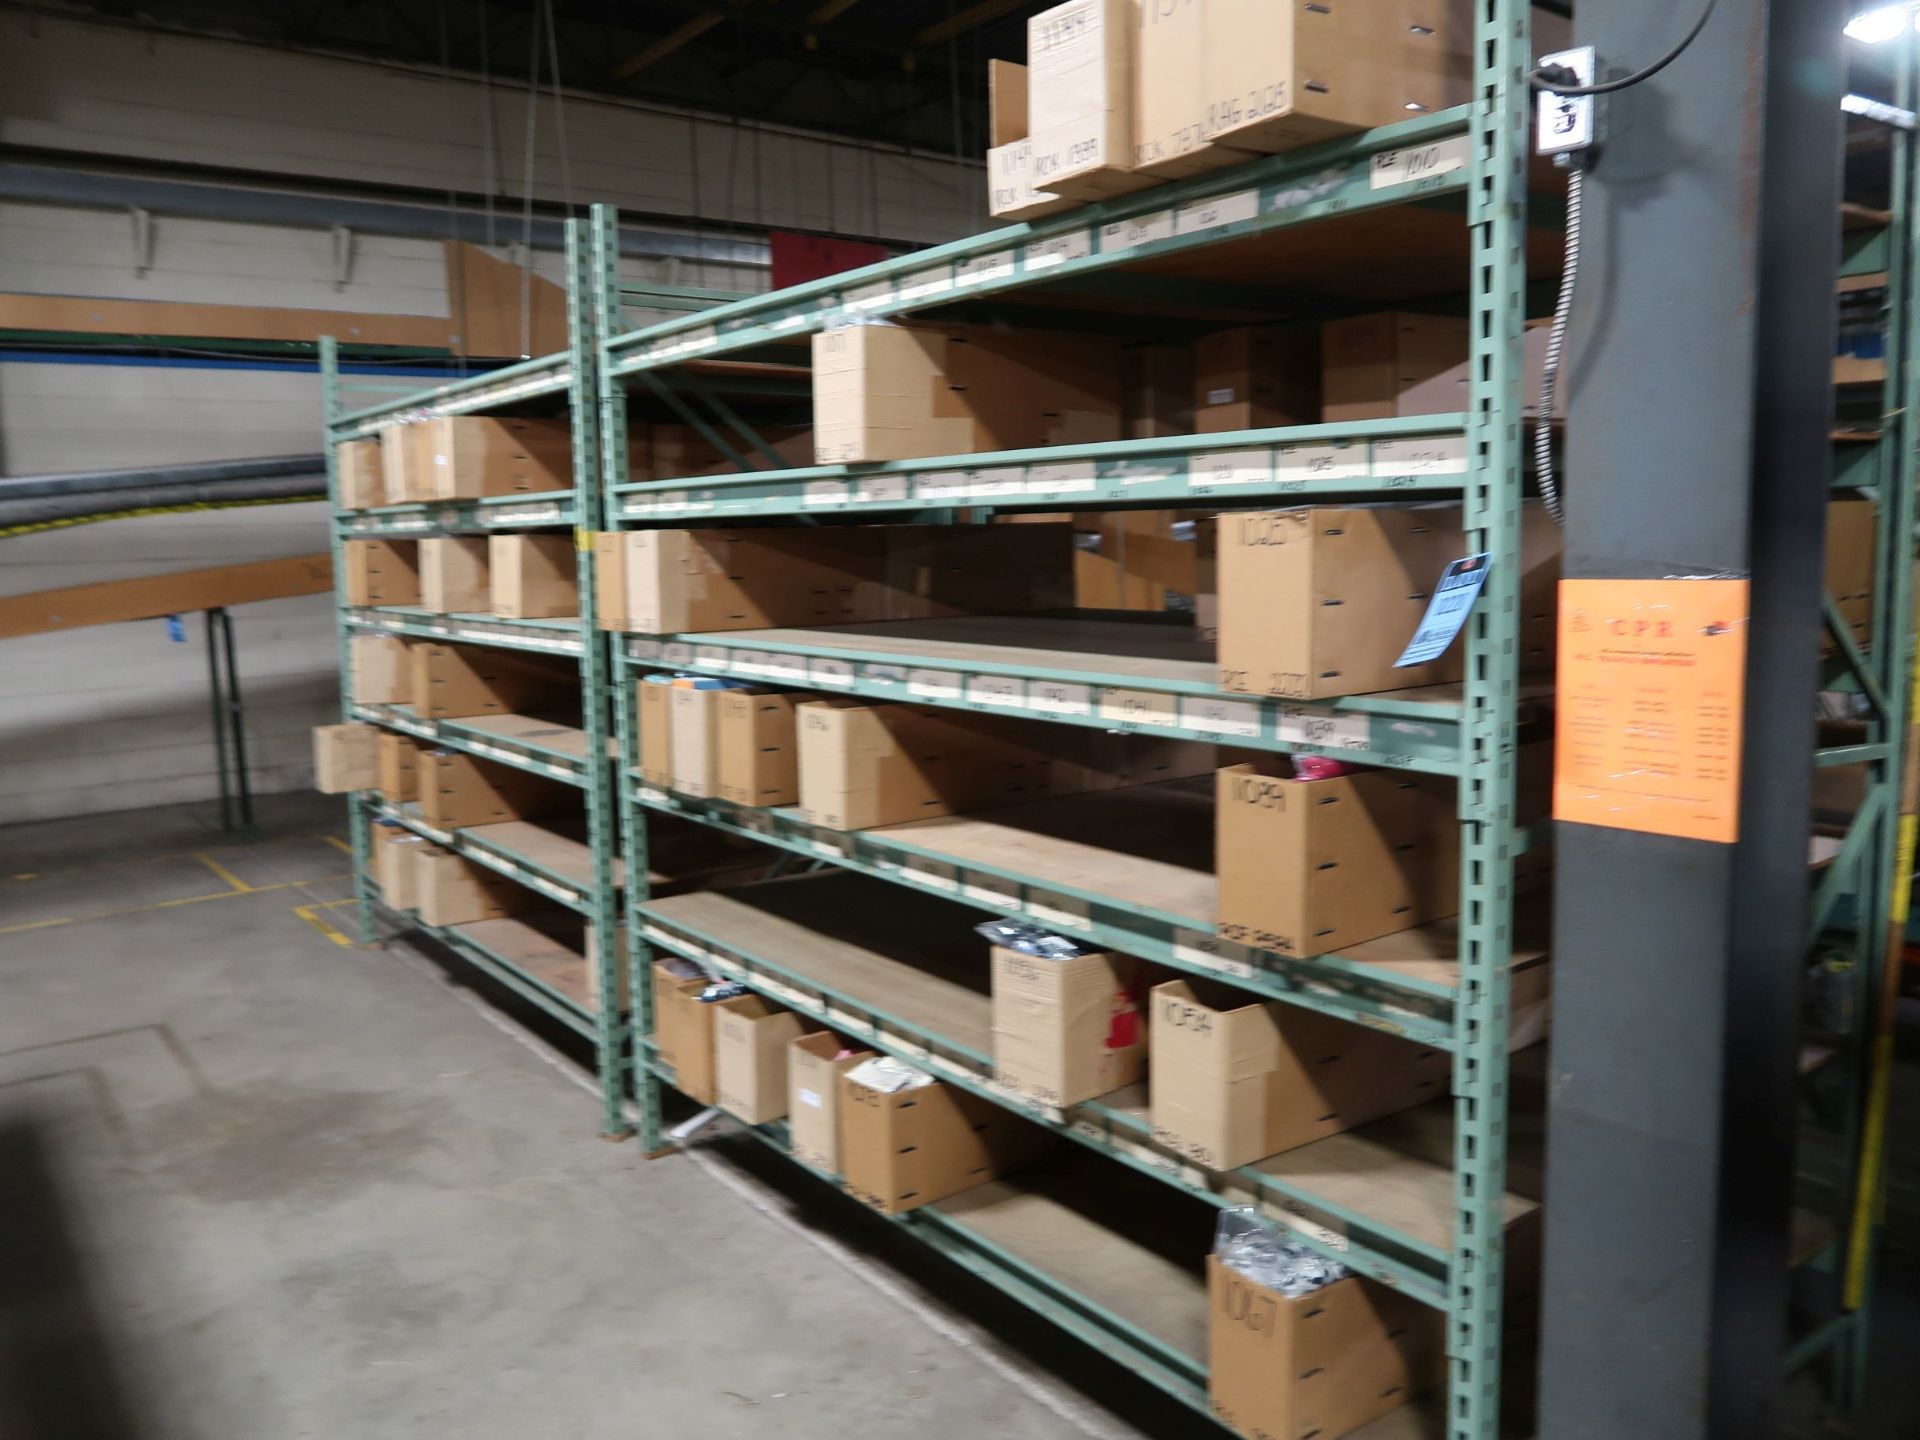 SECTIONS 96" X 48" X 96" ADJUSTABLE BEAM PALLET RACK; (4) 48" X 96" UPRIGHTS, (24) 96" CROSSBEAMS